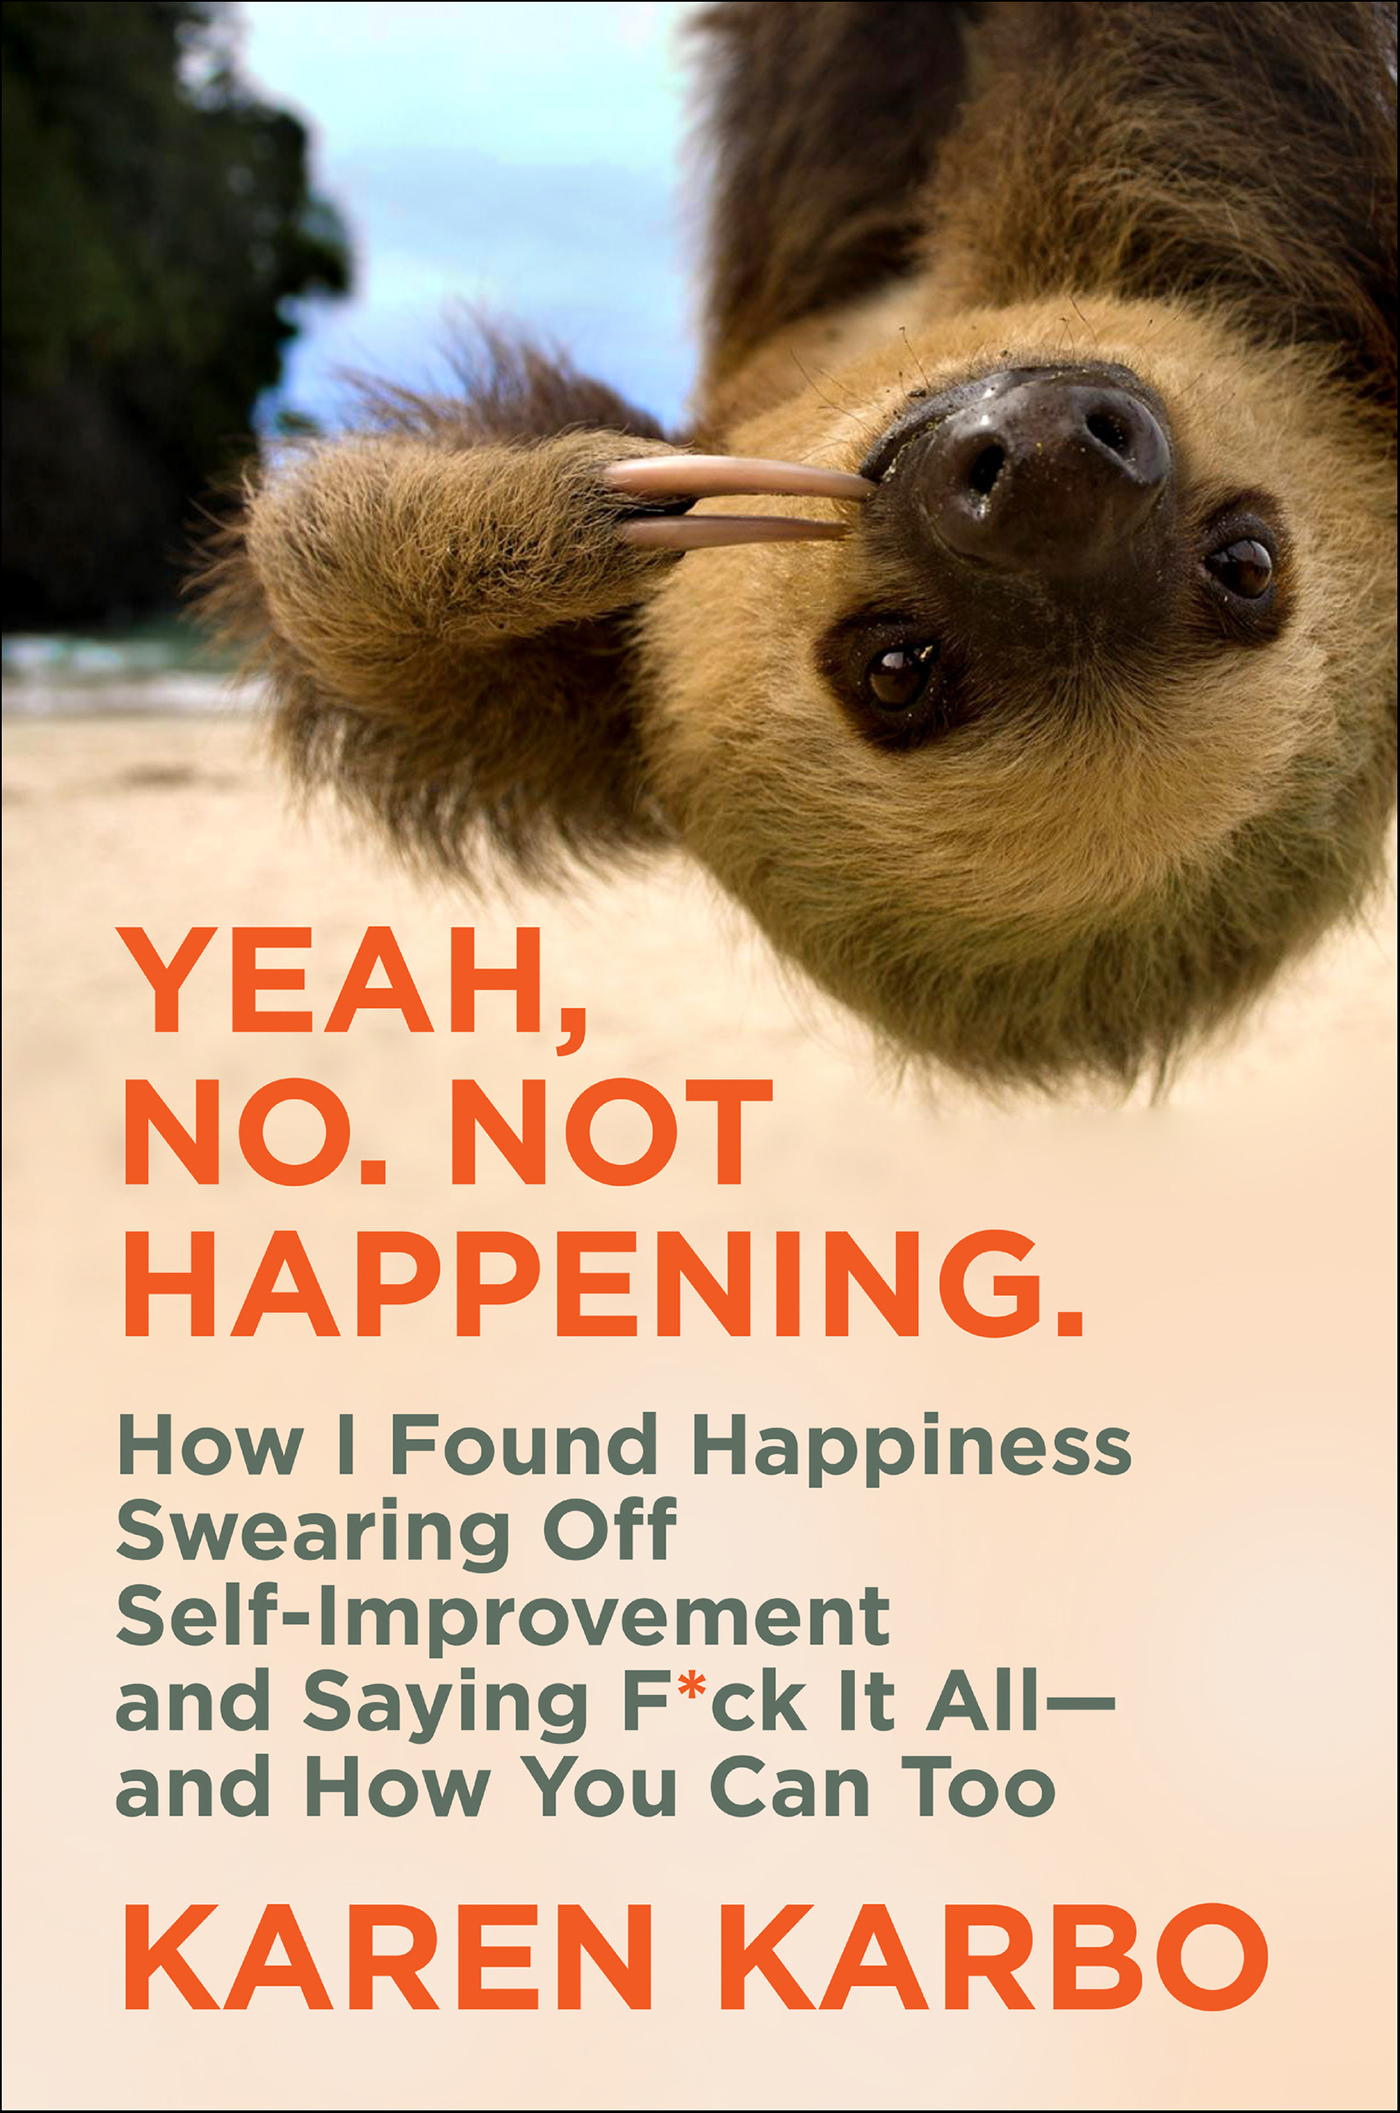 Yeah, No. Not Happening. How I Found Happiness Swearing Off Self-Improvement and Saying F*ck It All--and How You Can Too cover image